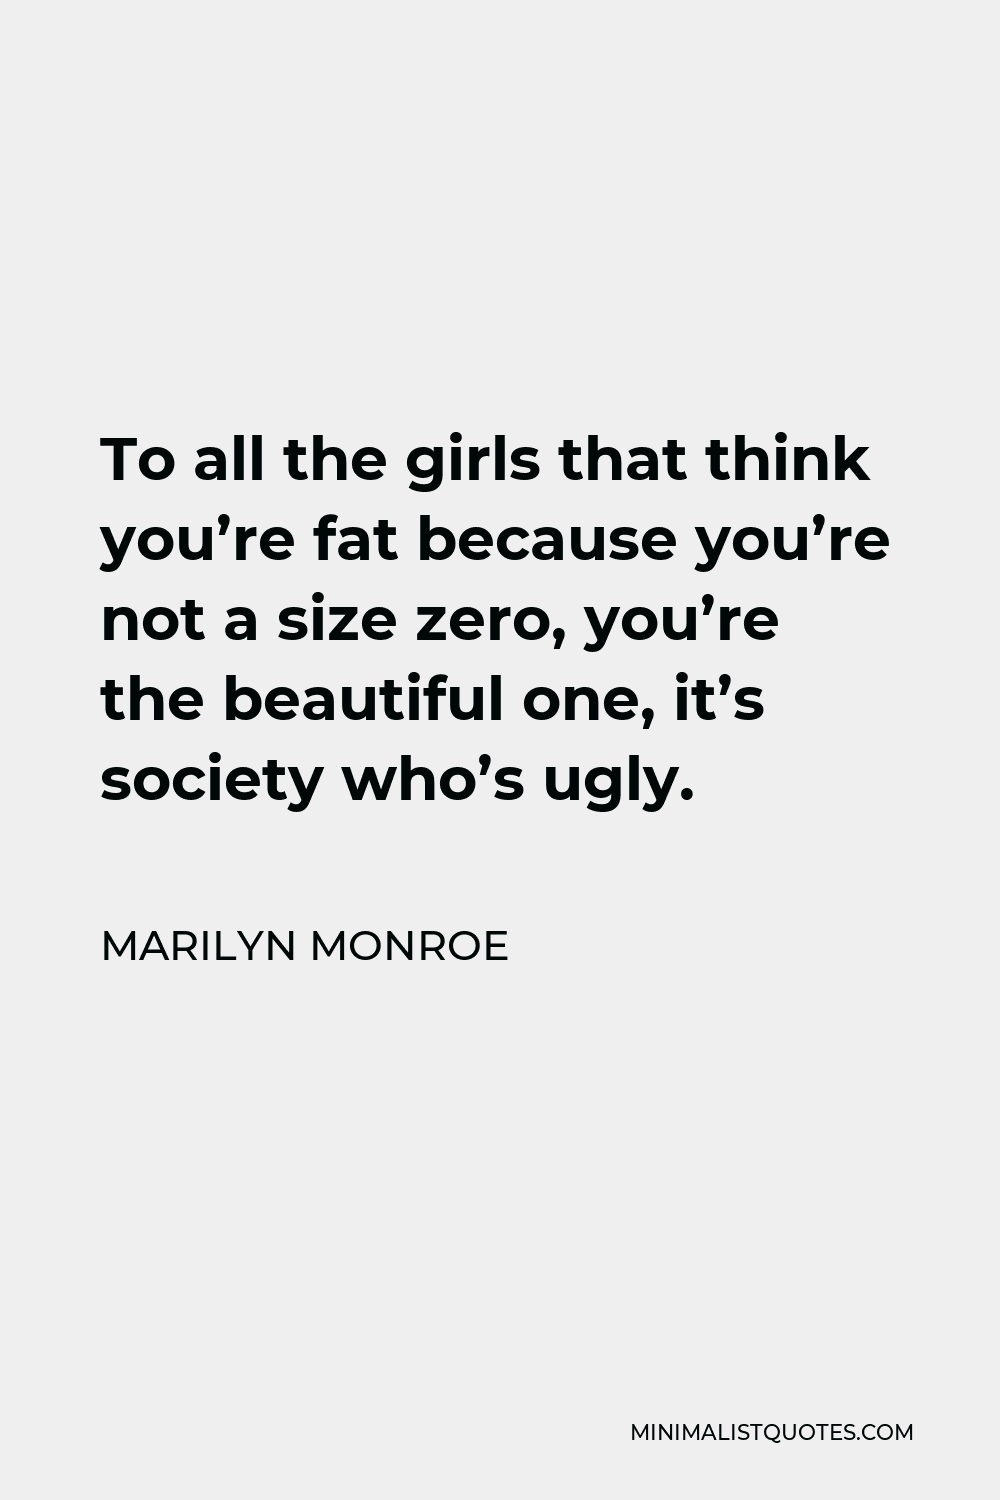 Marilyn Monroe Quote - To all the girls that think you’re fat because you’re not a size zero, you’re the beautiful one, it’s society who’s ugly.